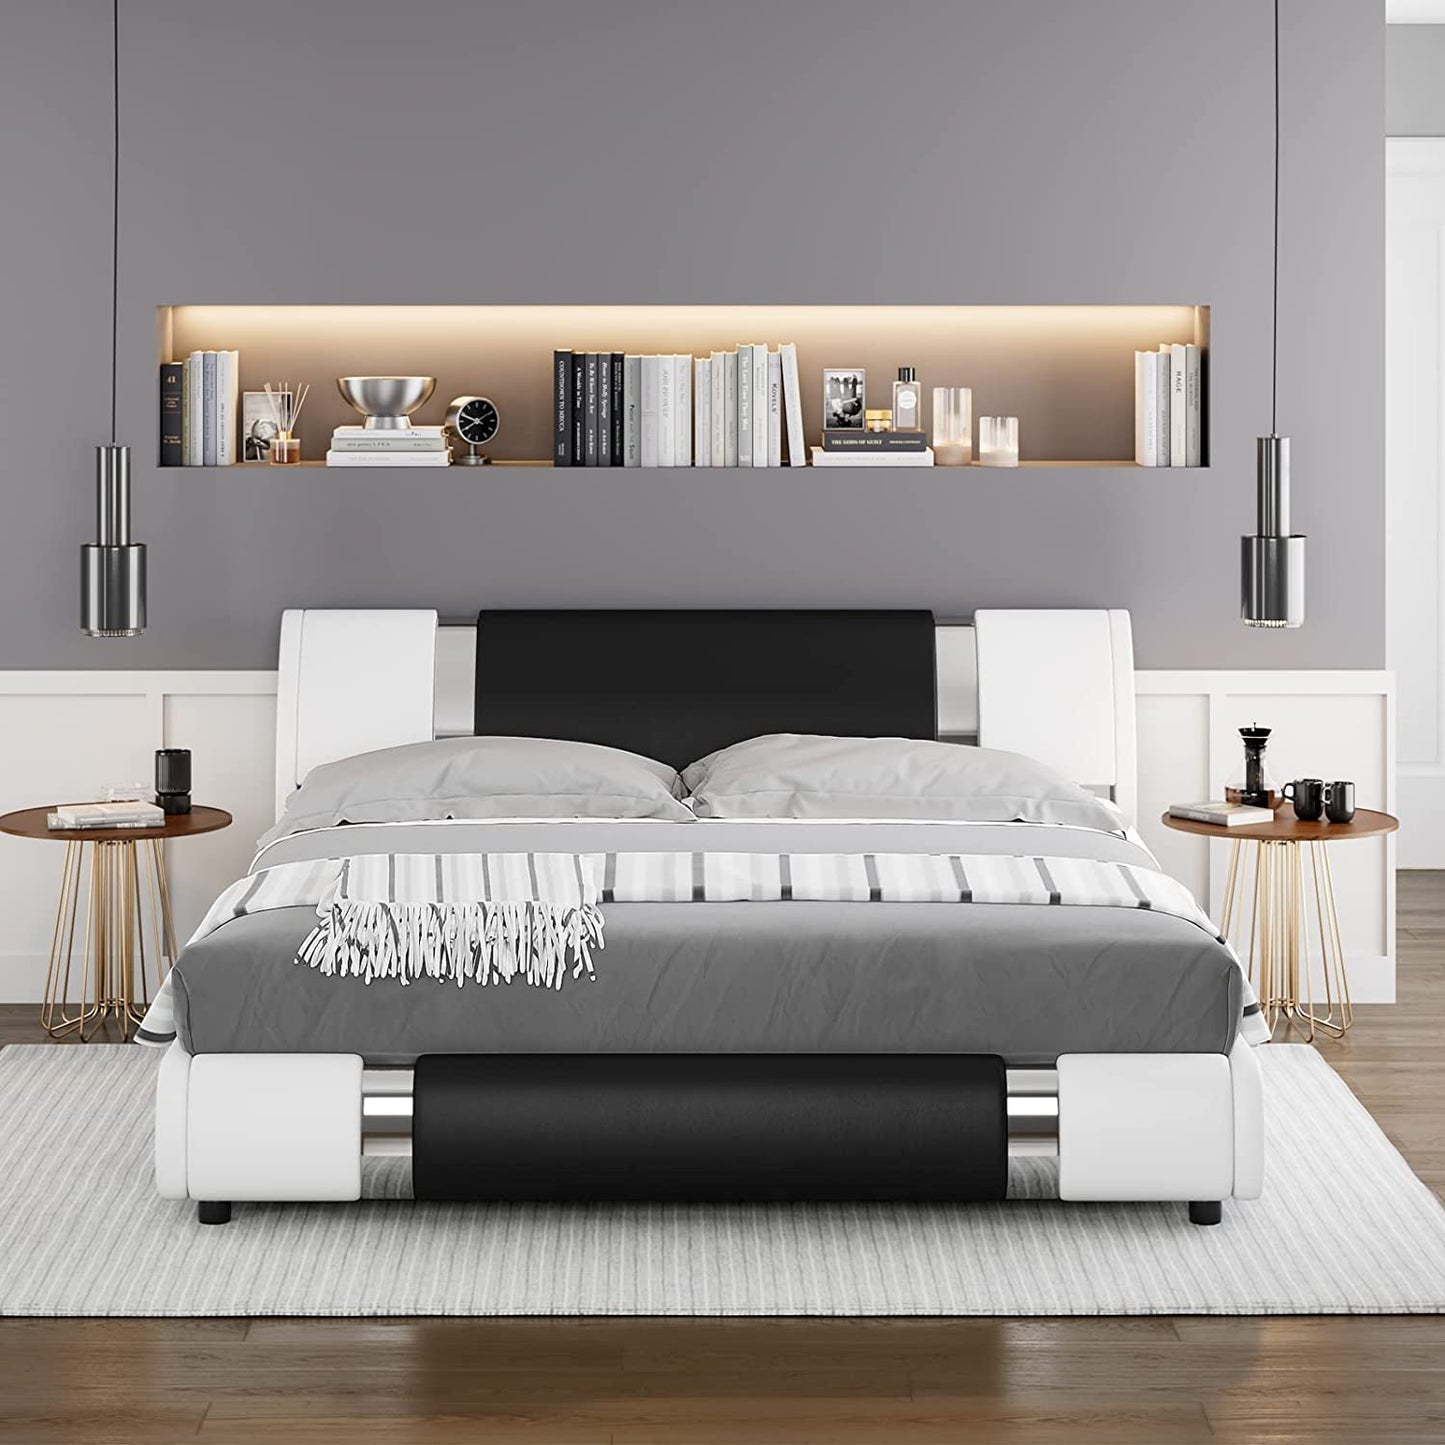 Modern Faux Leather Upholstered Platform Bed Frame with Metal Decoration Headboard, Curved Headboard, Wooden Slats Support, No Box Spring Needed, Full Size, White